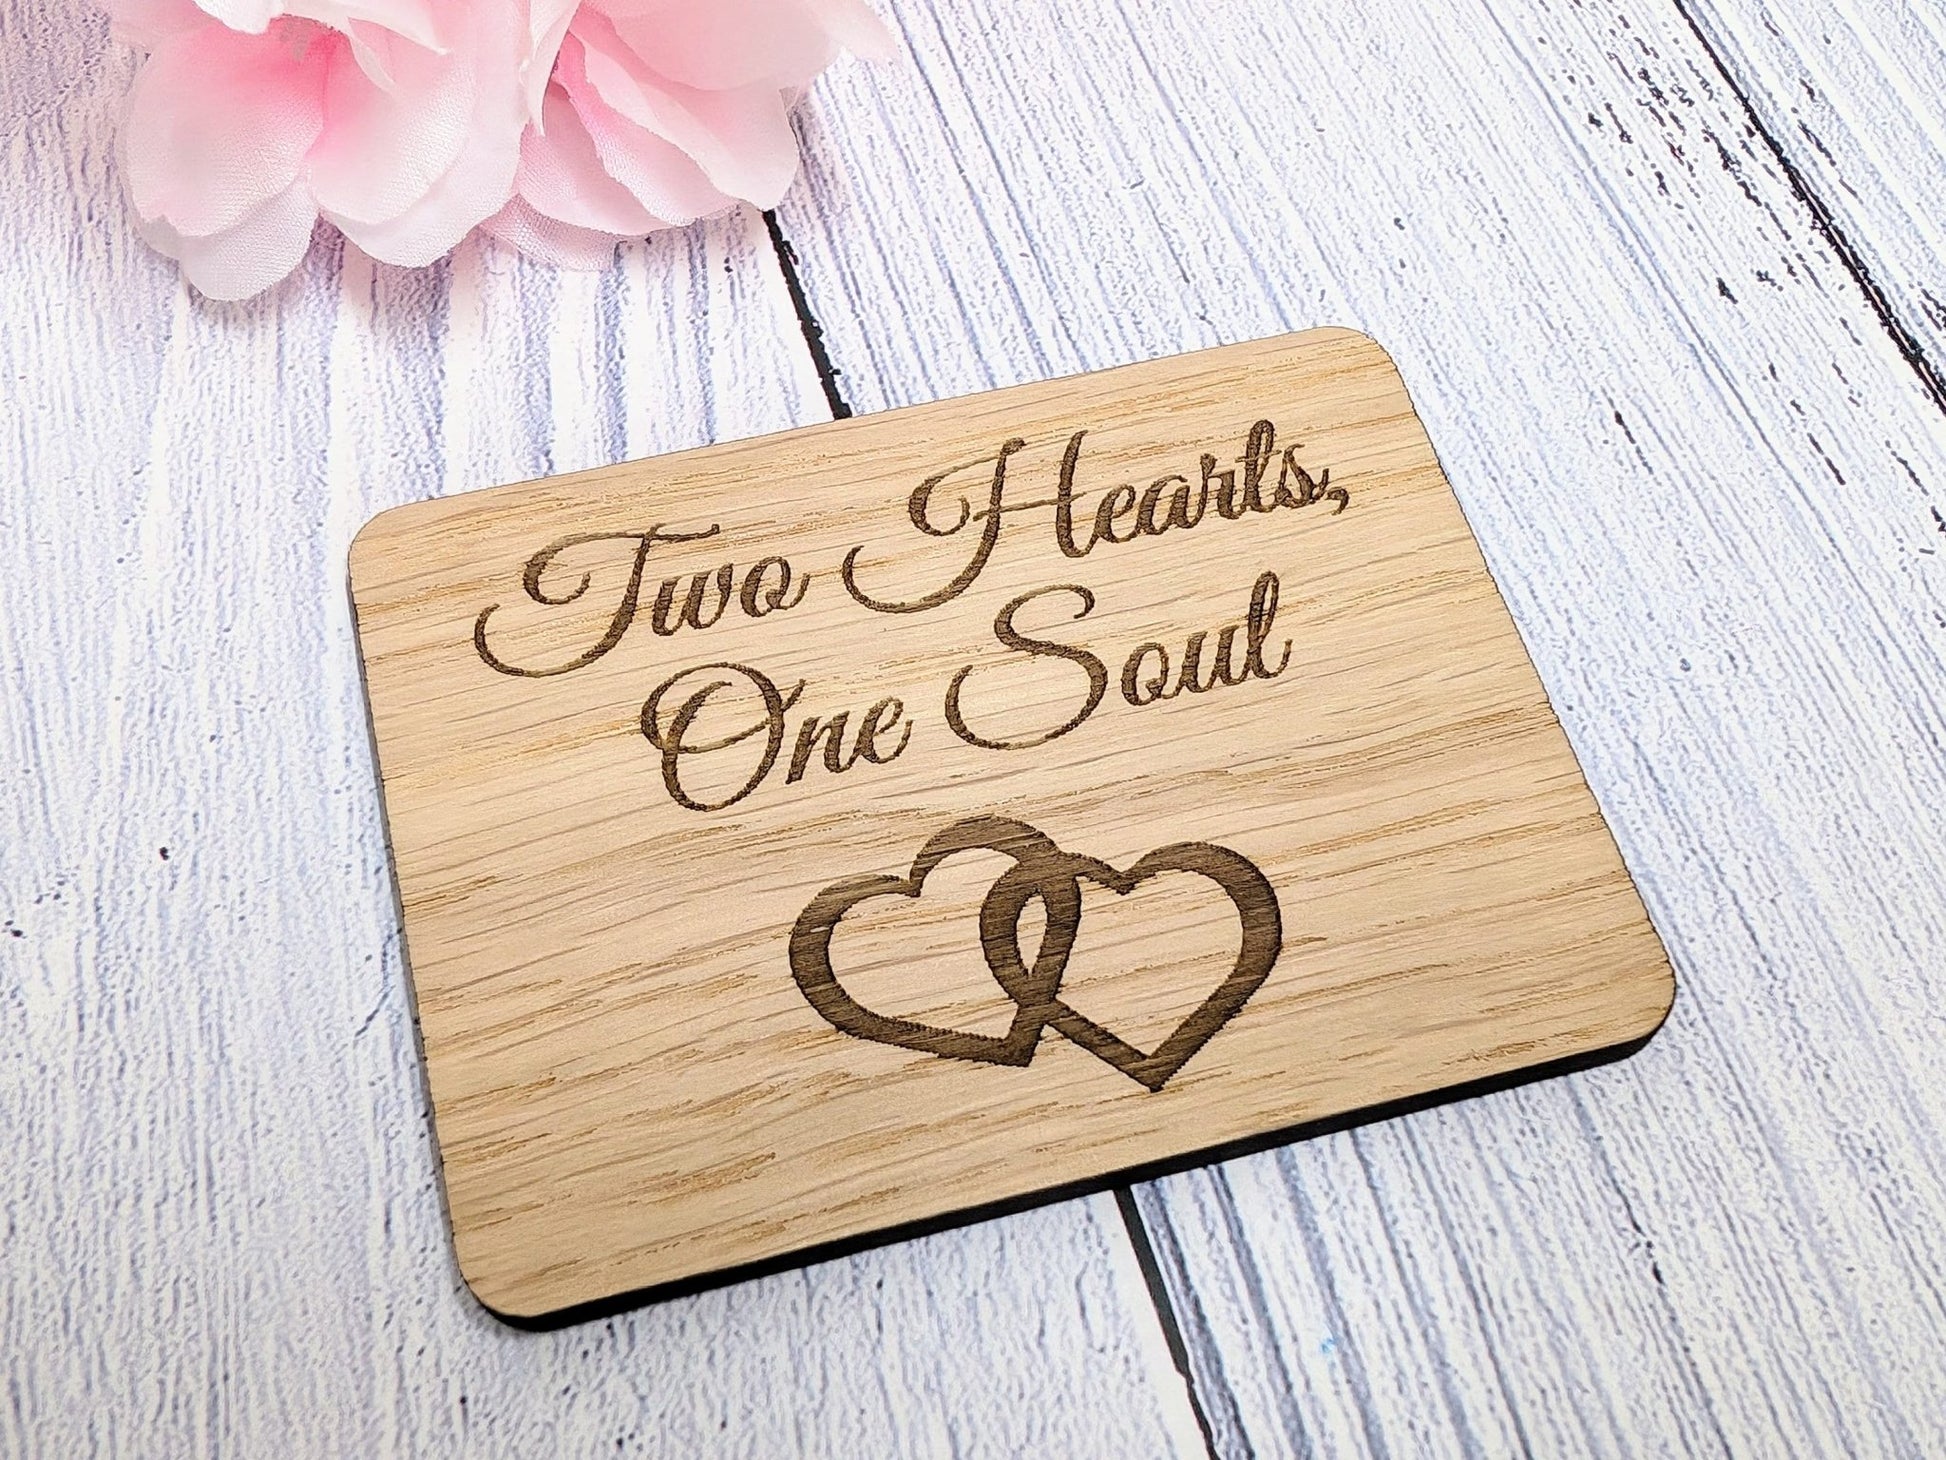 Two Hearts One Soul - Wooden Fridge Magnet with Interlocking Hearts - Romantic Gift - CherryGroveCraft